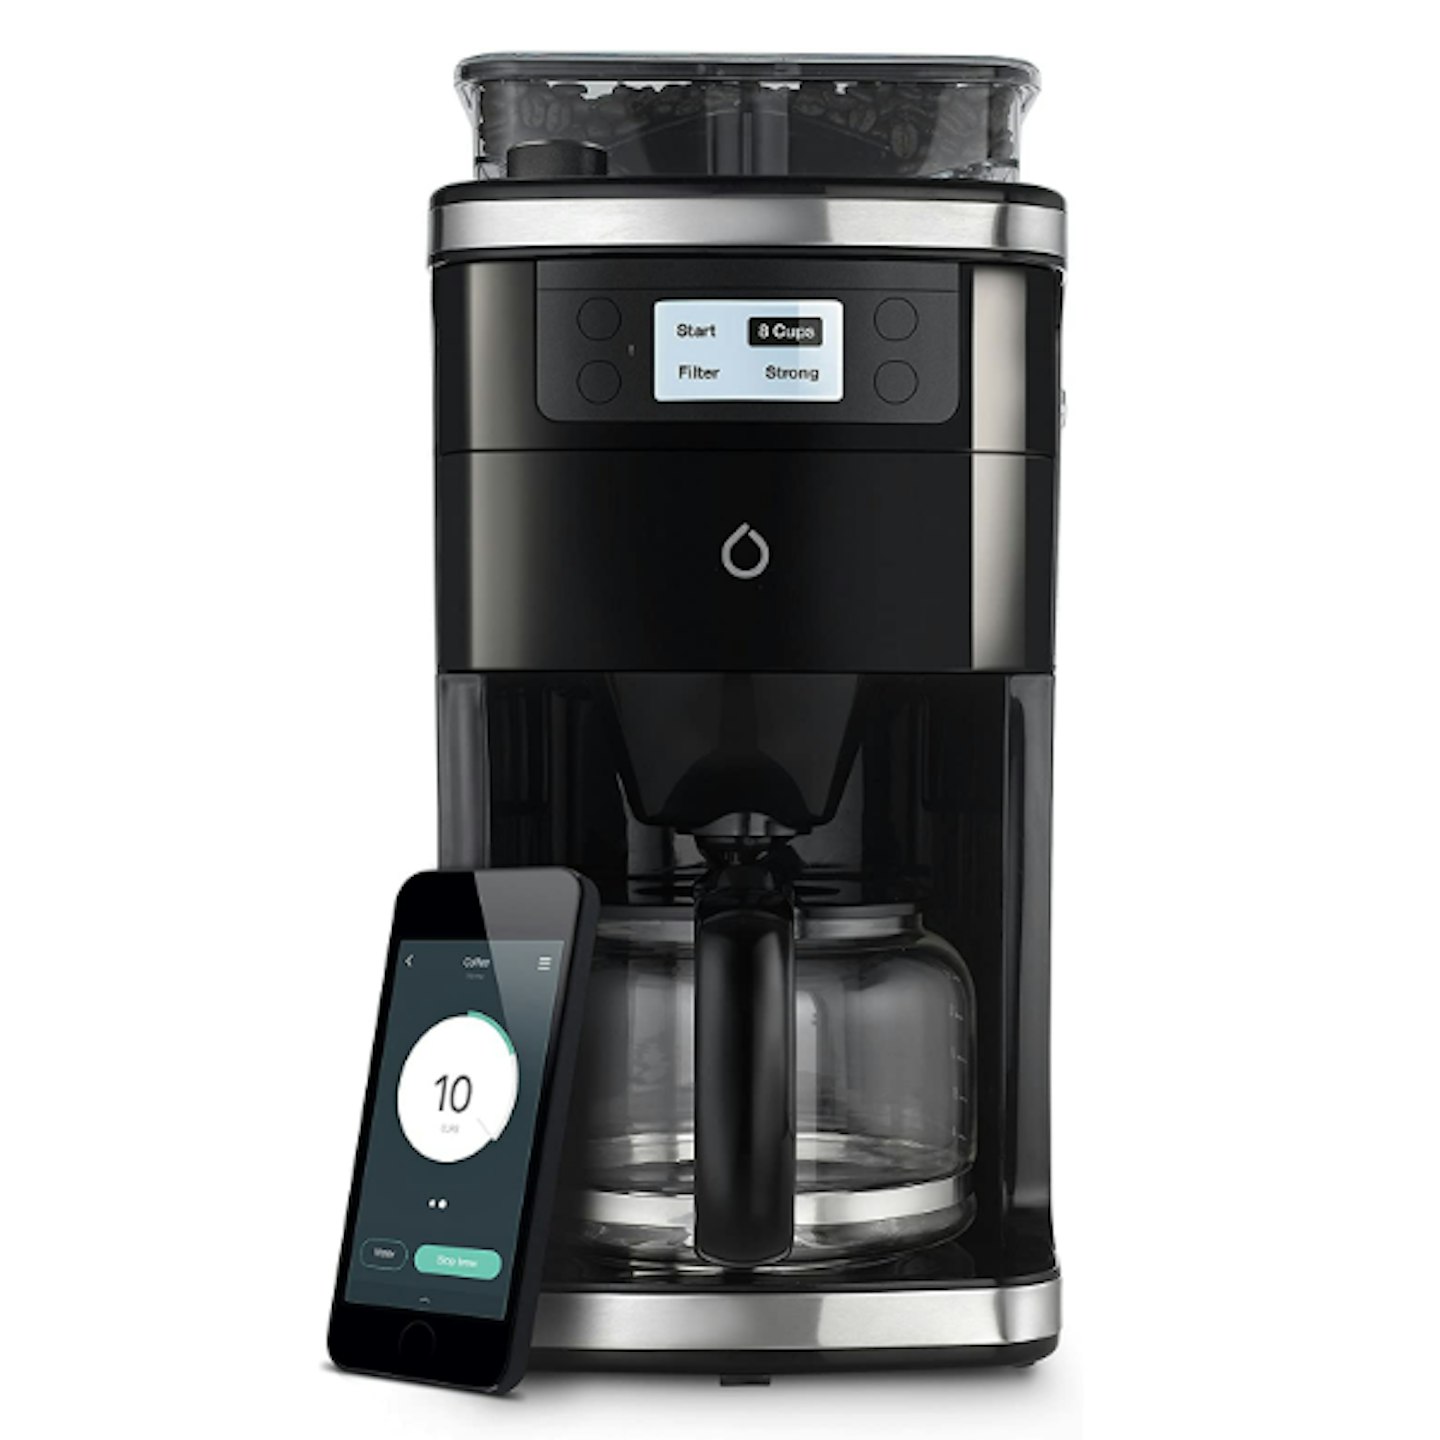 WiFi Bean-To-Cup Coffee Maker from Smarter